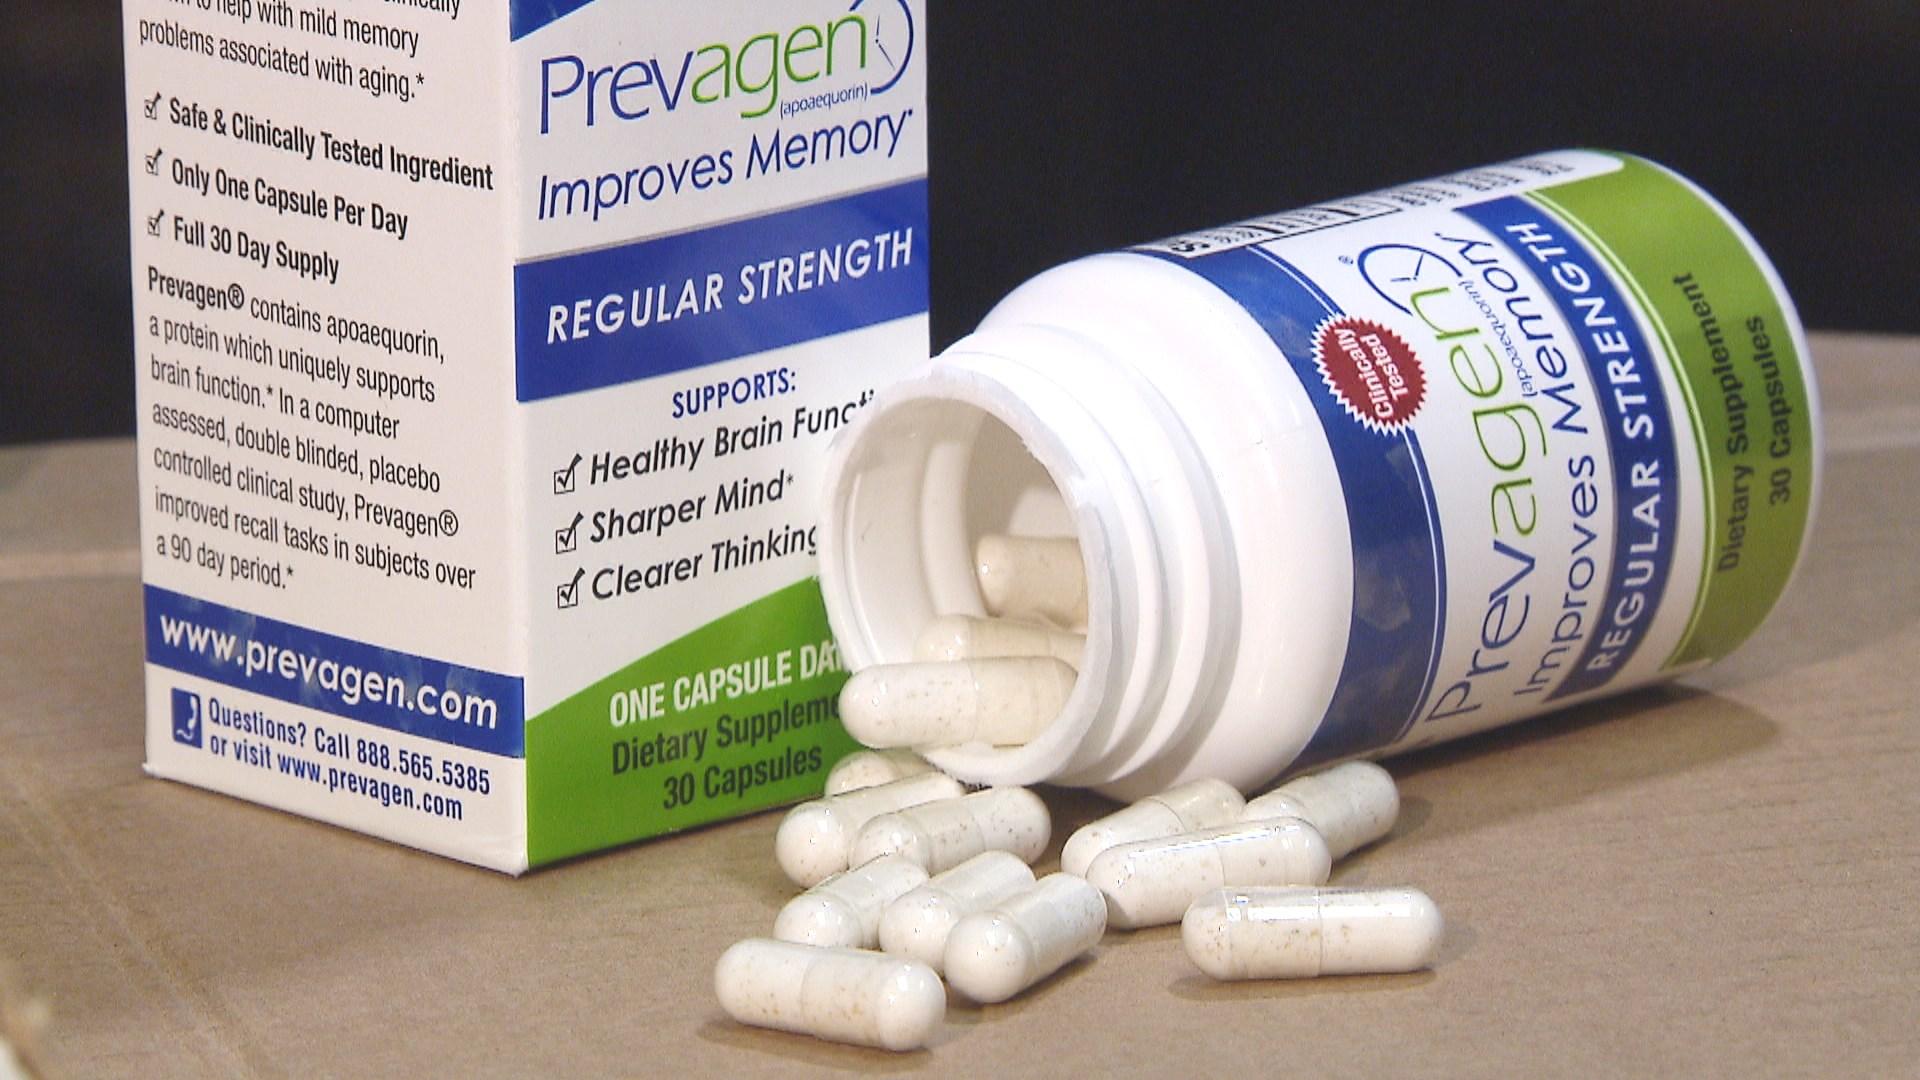 Prevagen supplement maker gets sued by government agencies over memory